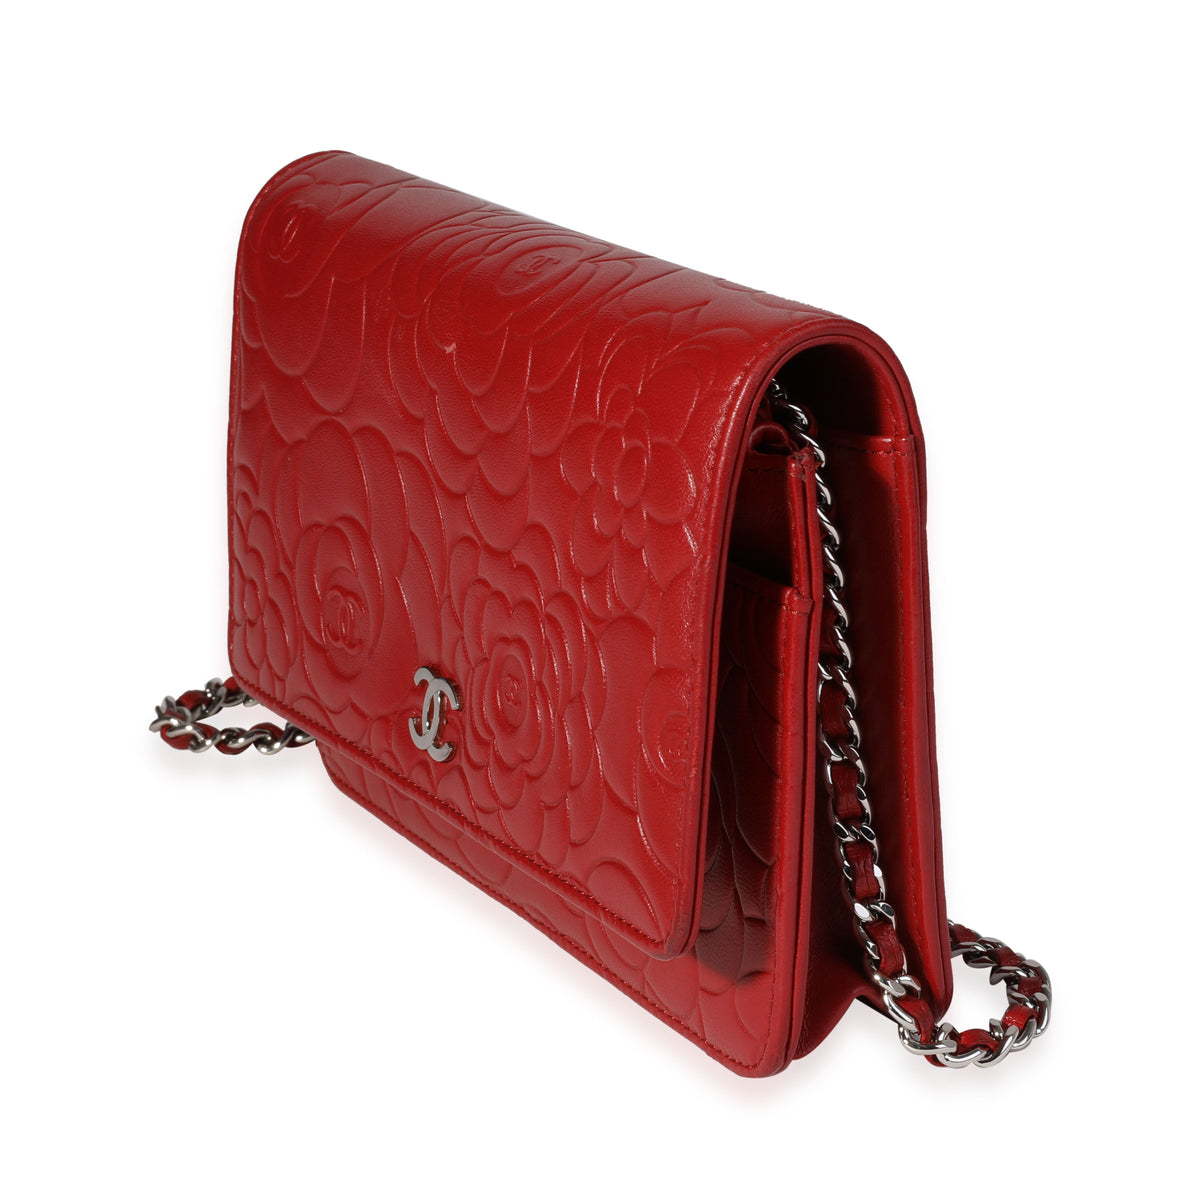 Chanel Red Camellia-Embossed Leather Wallet on Chain